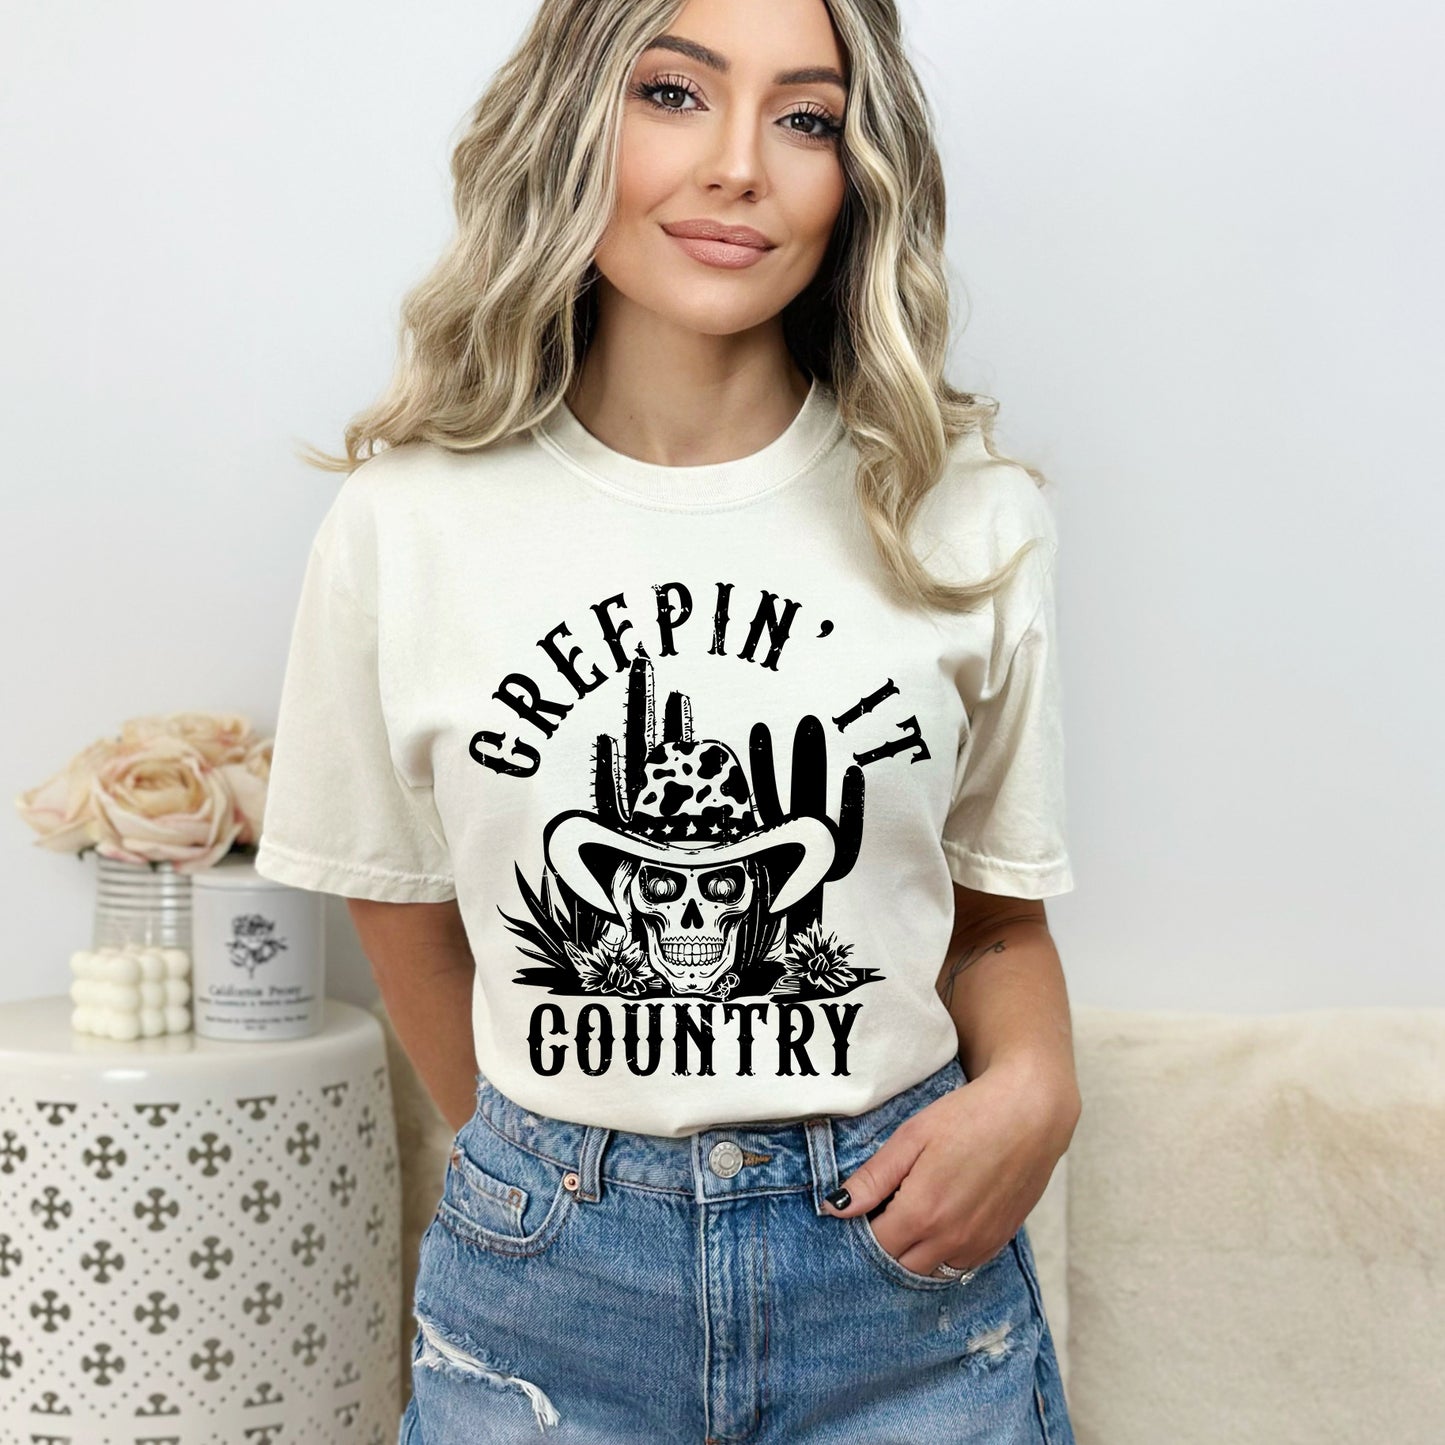 Creepin' It Country | Garment Dyed Short Sleeve Tee